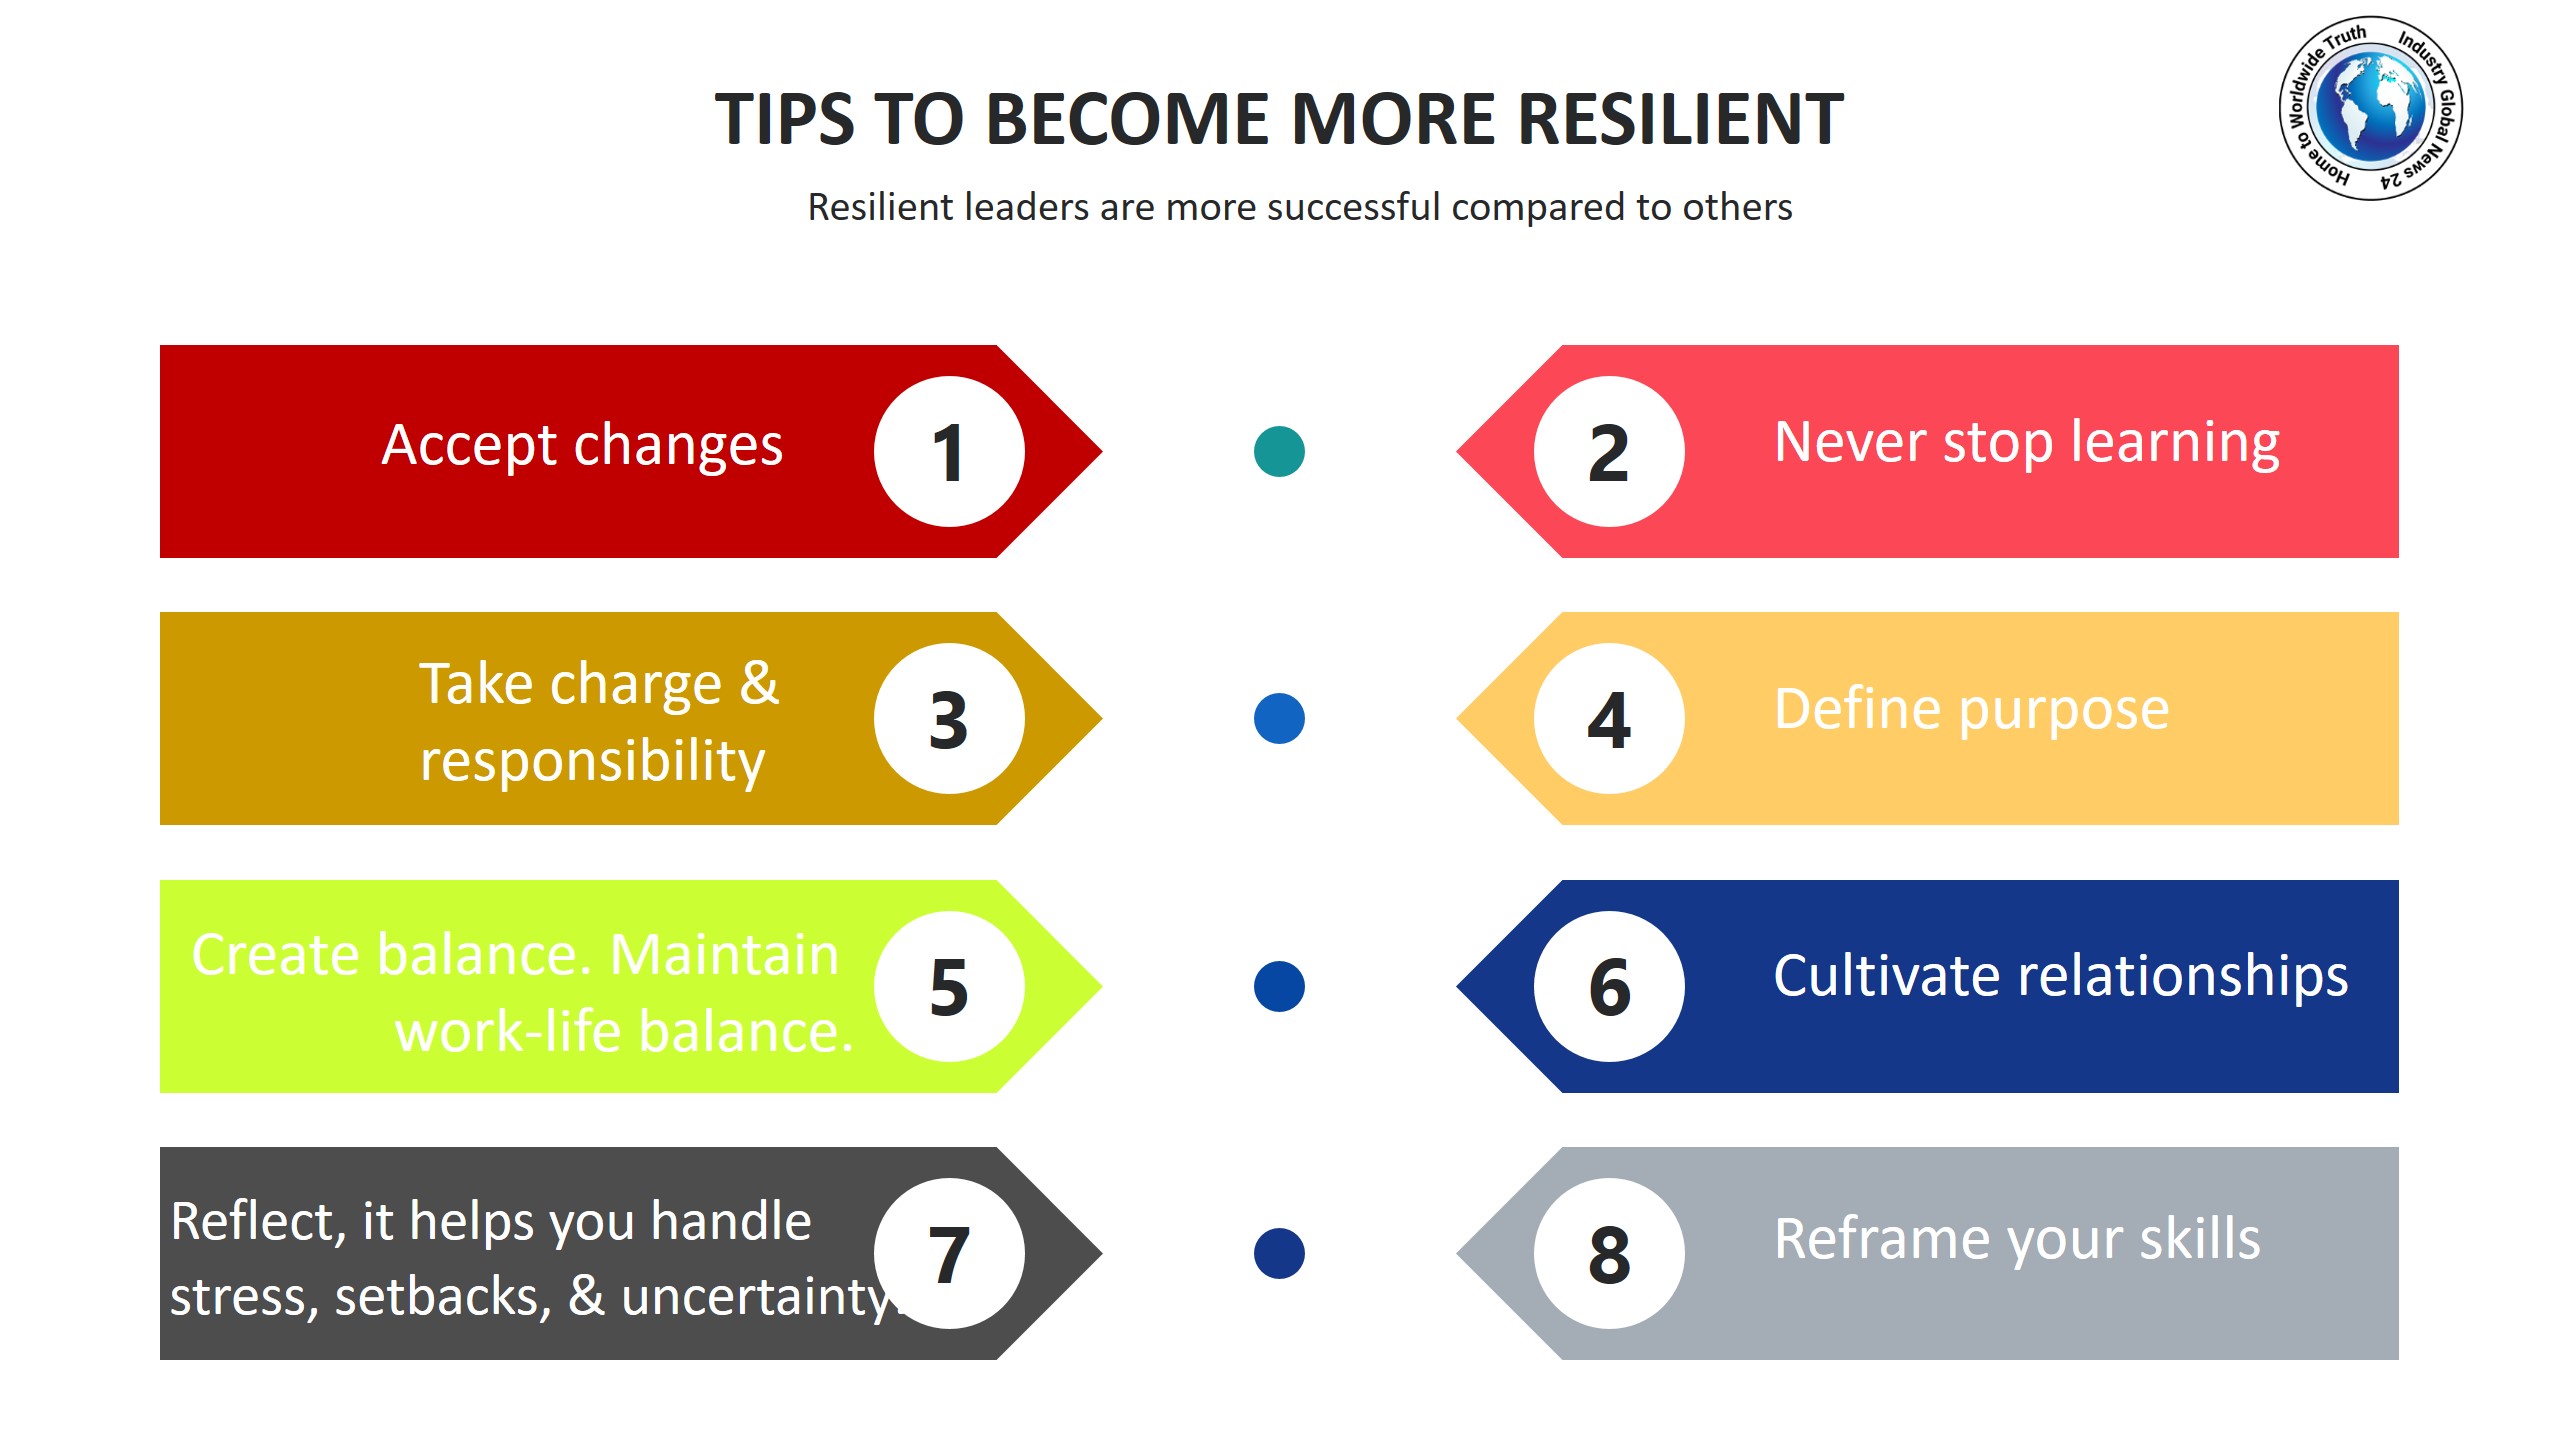 Tips to become more resilient